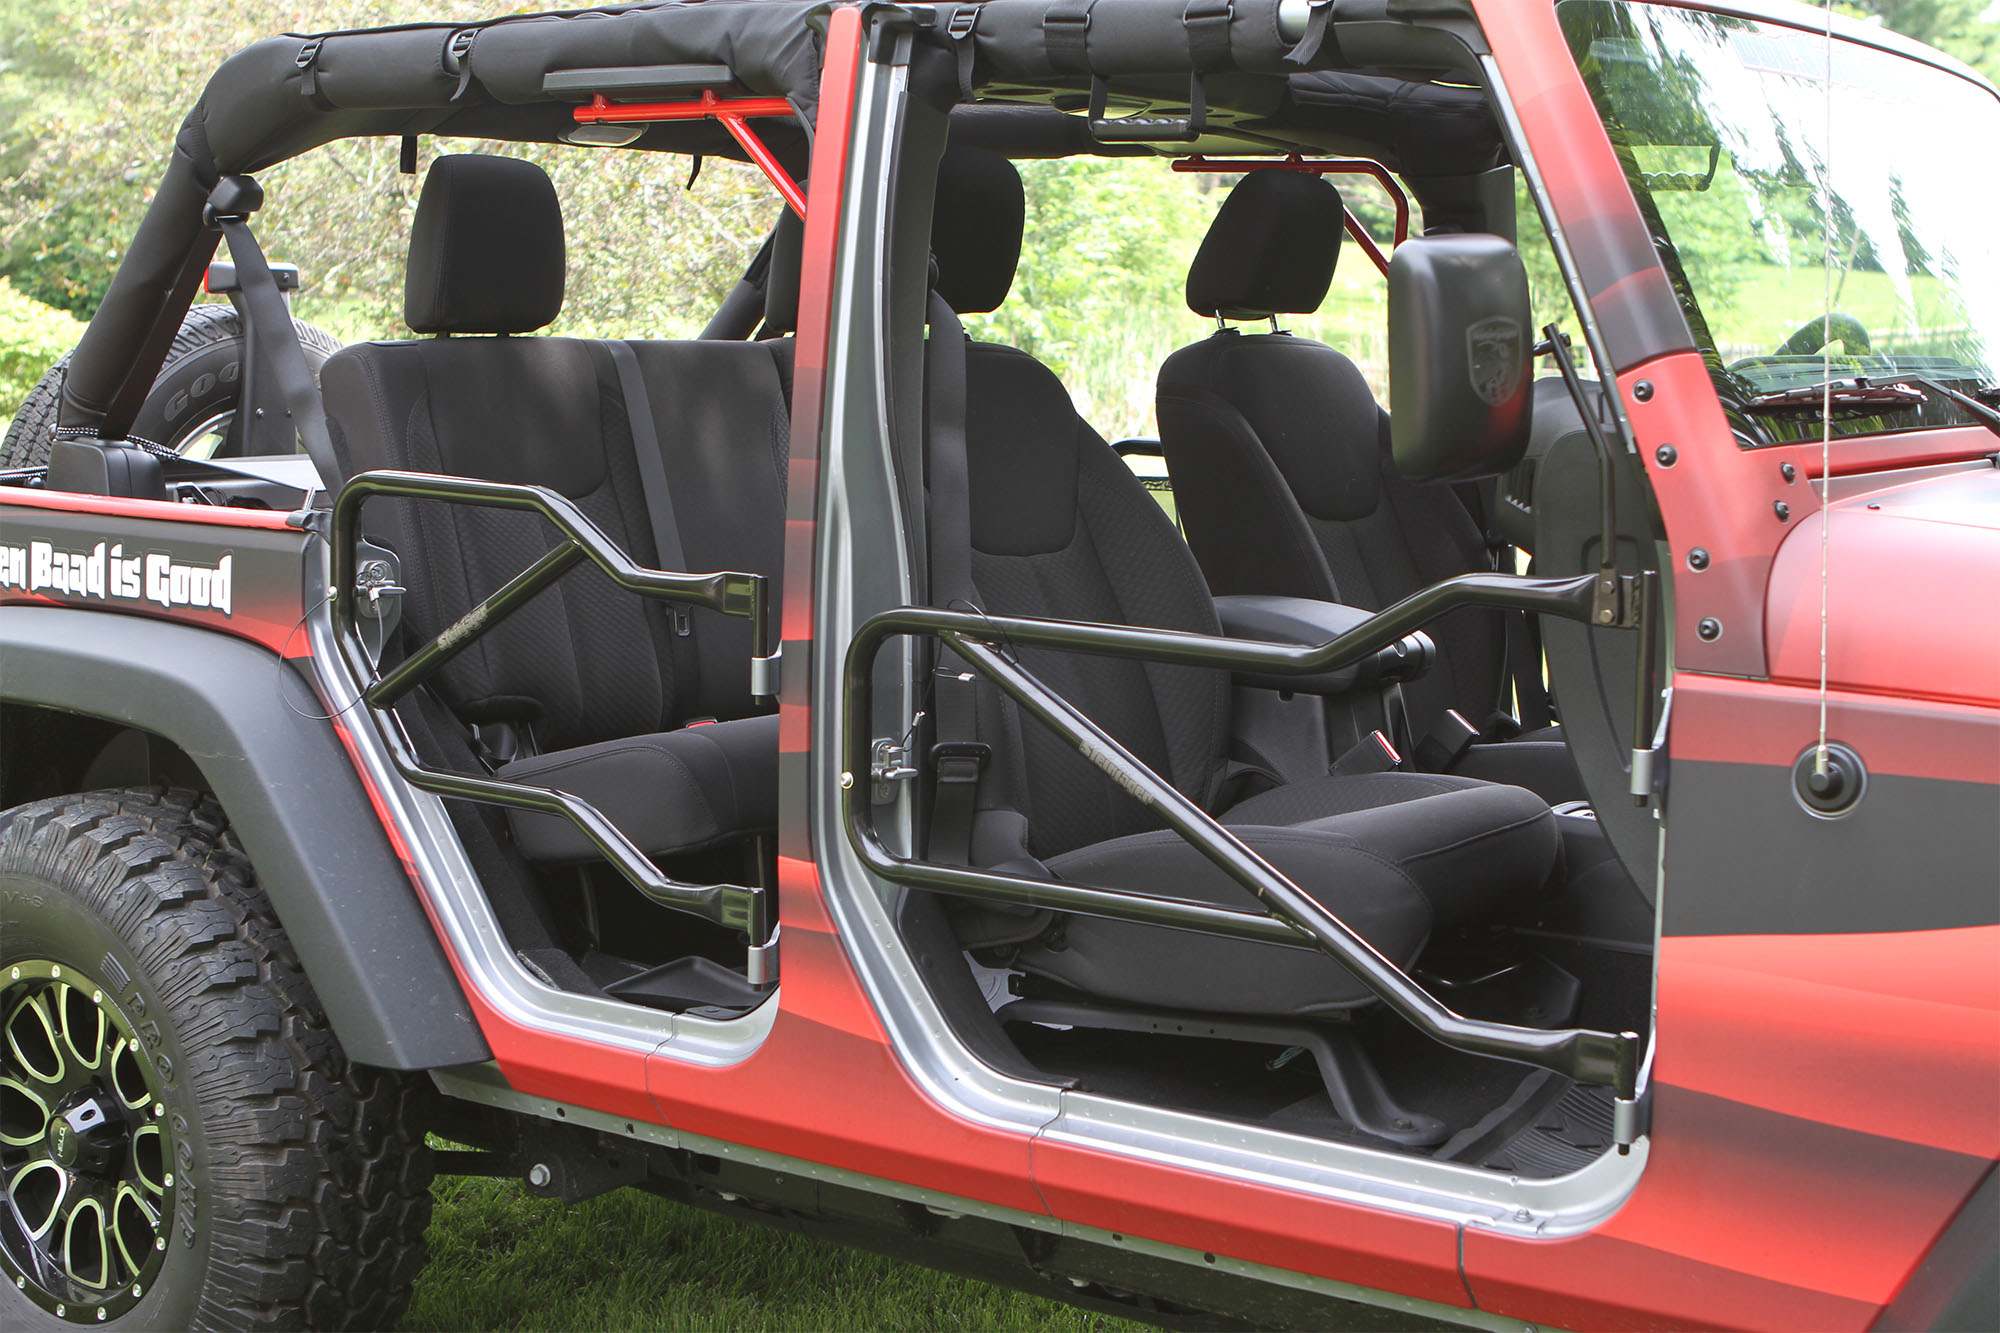 Jeep JK Wrangler Trail Door Kit Red with White Covers